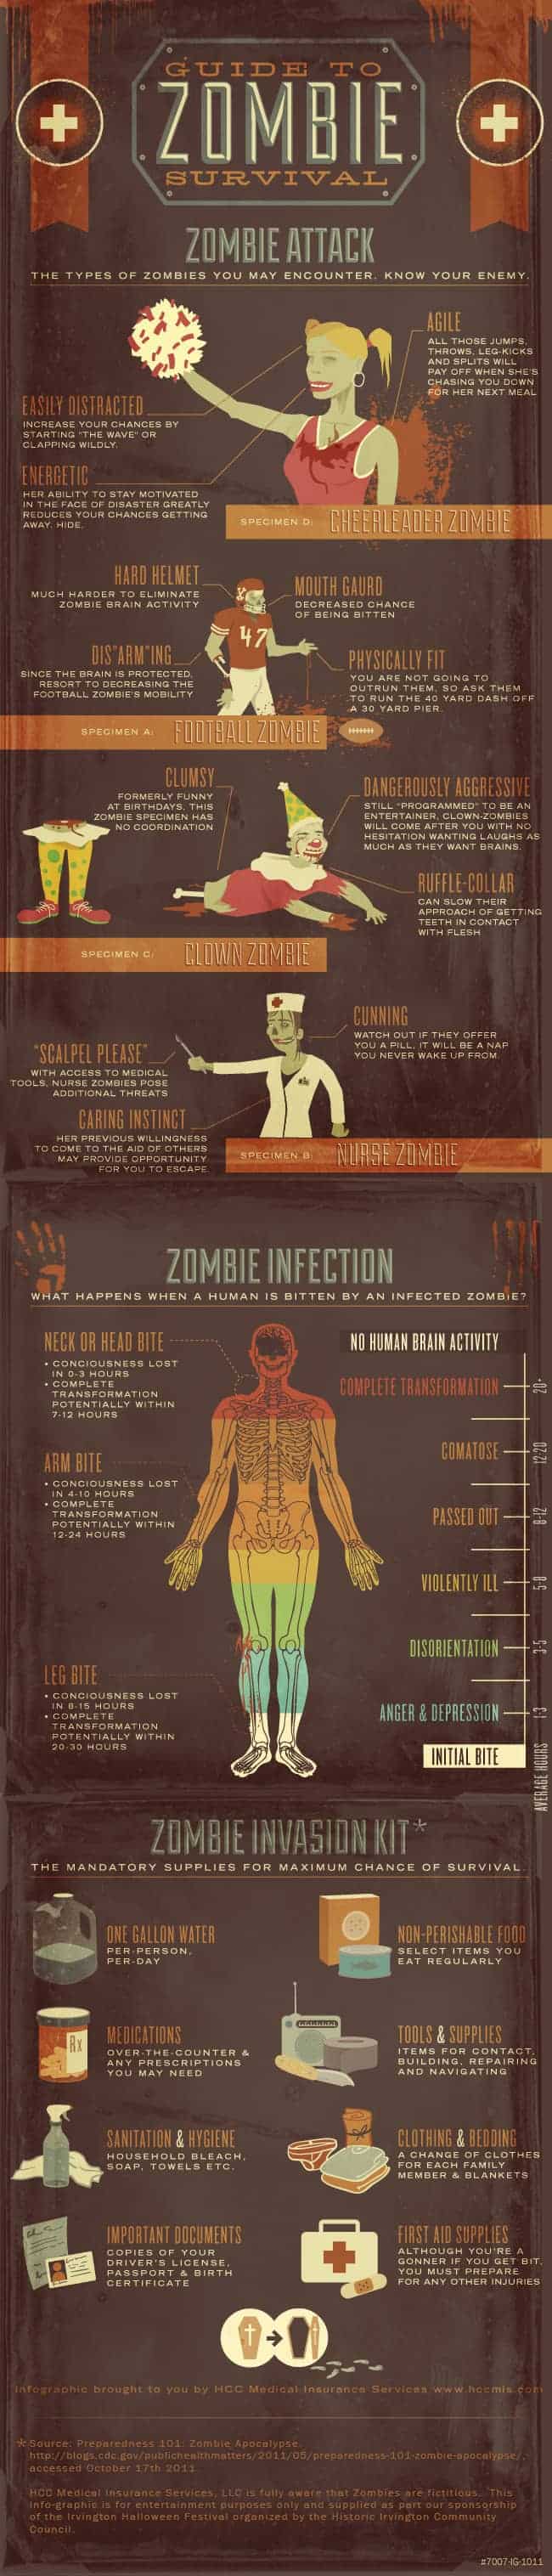 A Guide to Zombie Survival | Daily Infographic